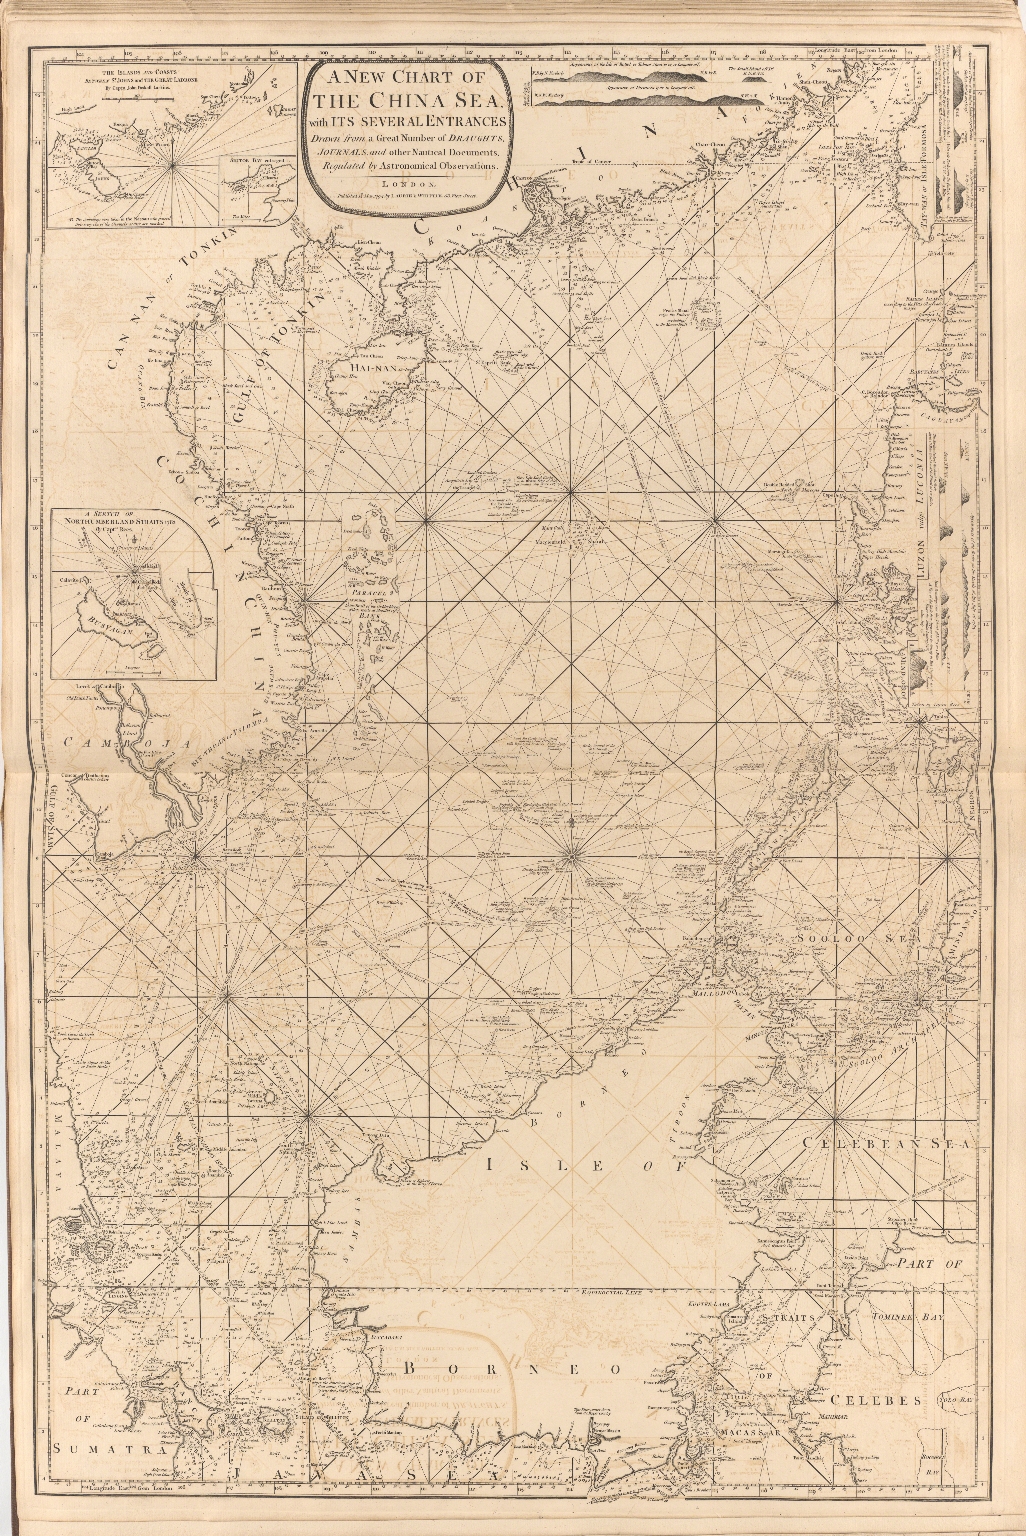 A new chart of the China Sea, with its several entrances : drawn from a great number of draughts, journals, and other National documents, regulated by astronomical observations